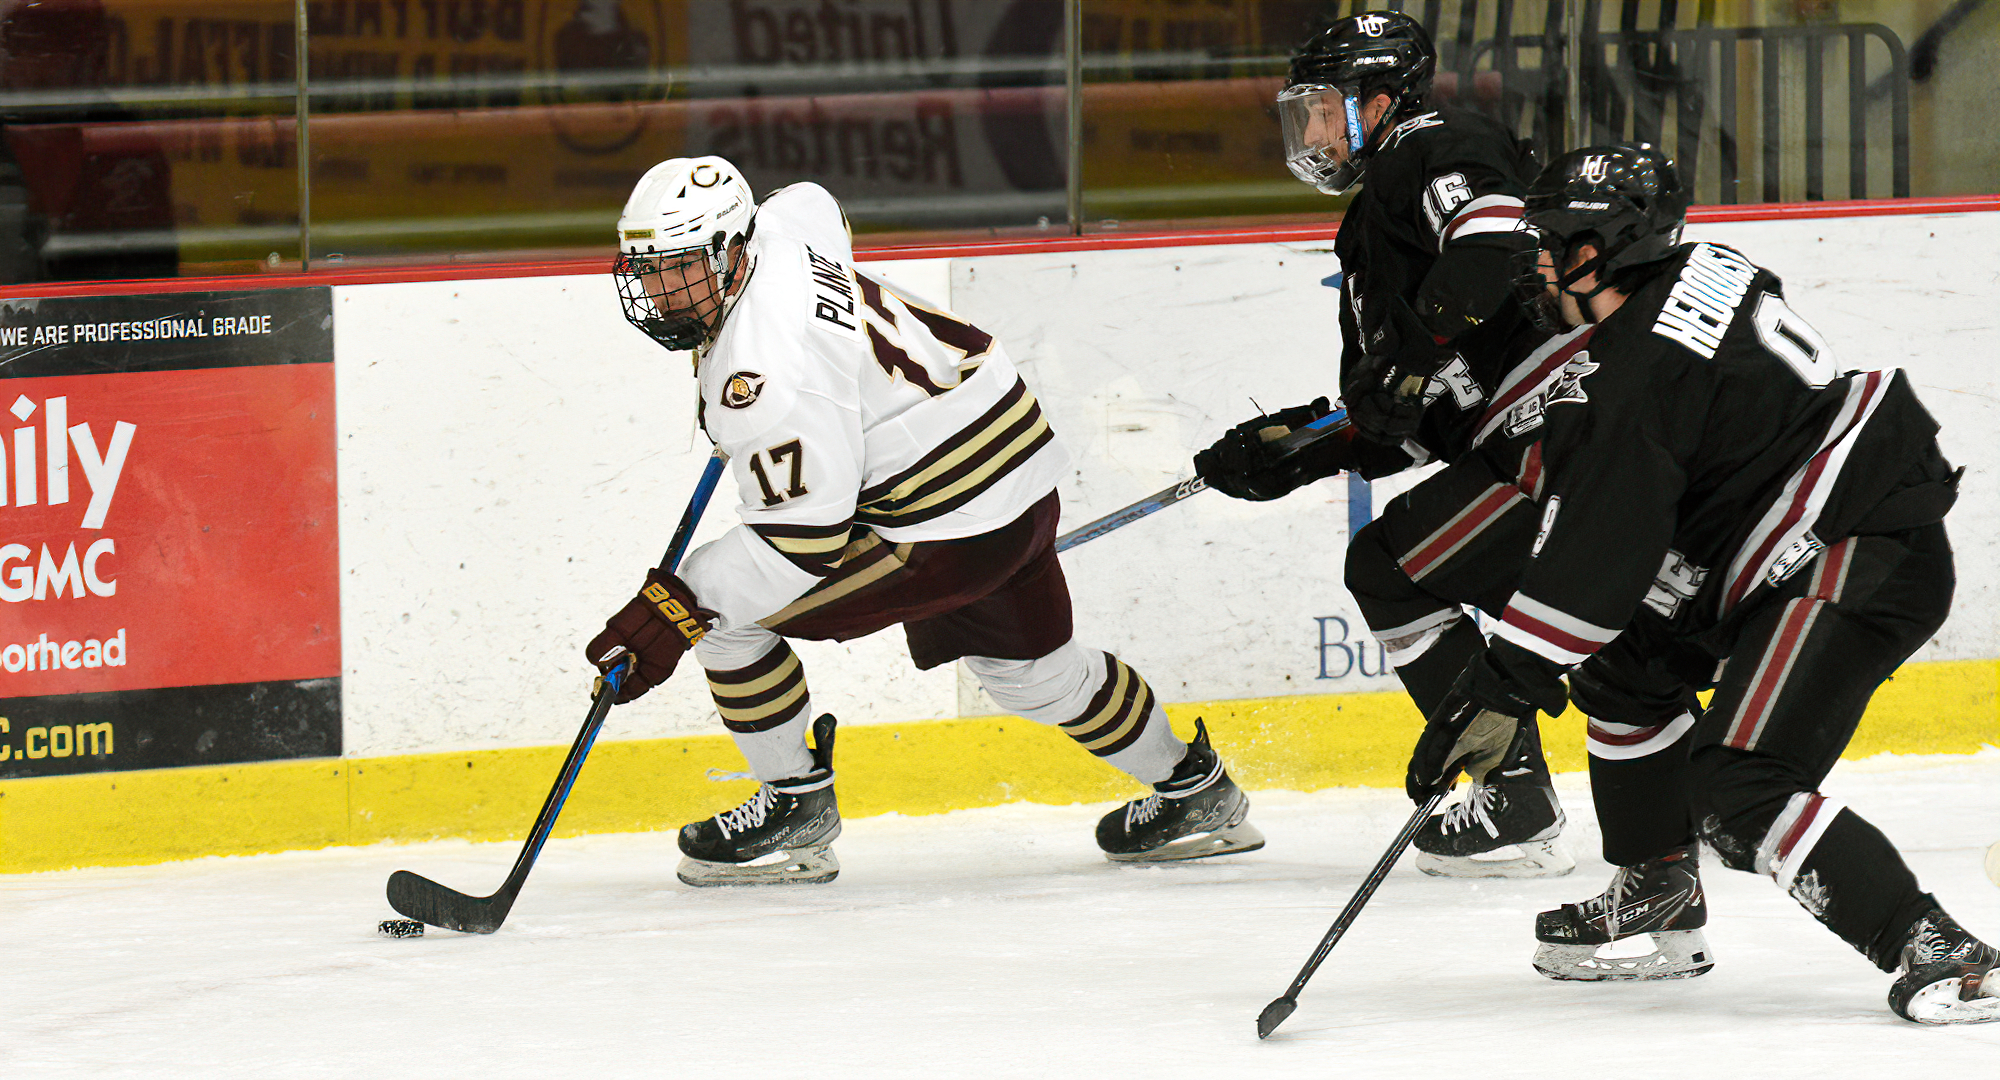 Mason Plante scored two goals, added an assist and recorded four shots on goal in the Cobbers' 6-1 win at Hamline.